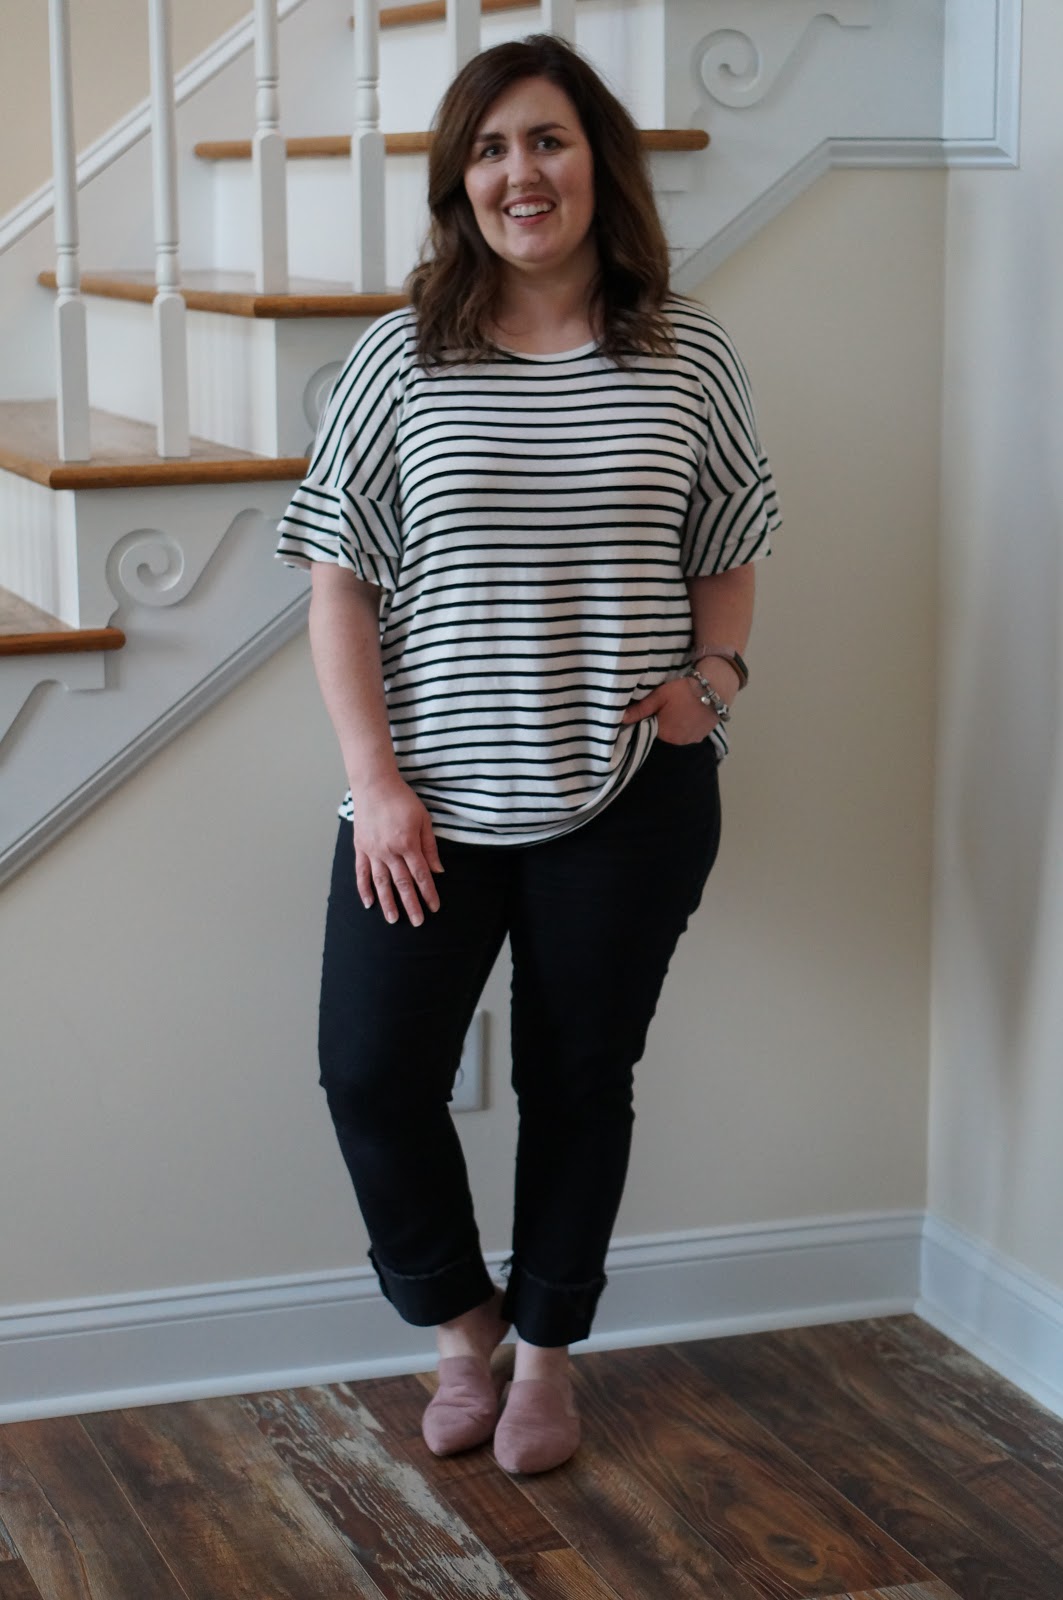 Popular North Carolina style blogger shares how to style a ruffle sleeve tee for work.  Click here to read it!